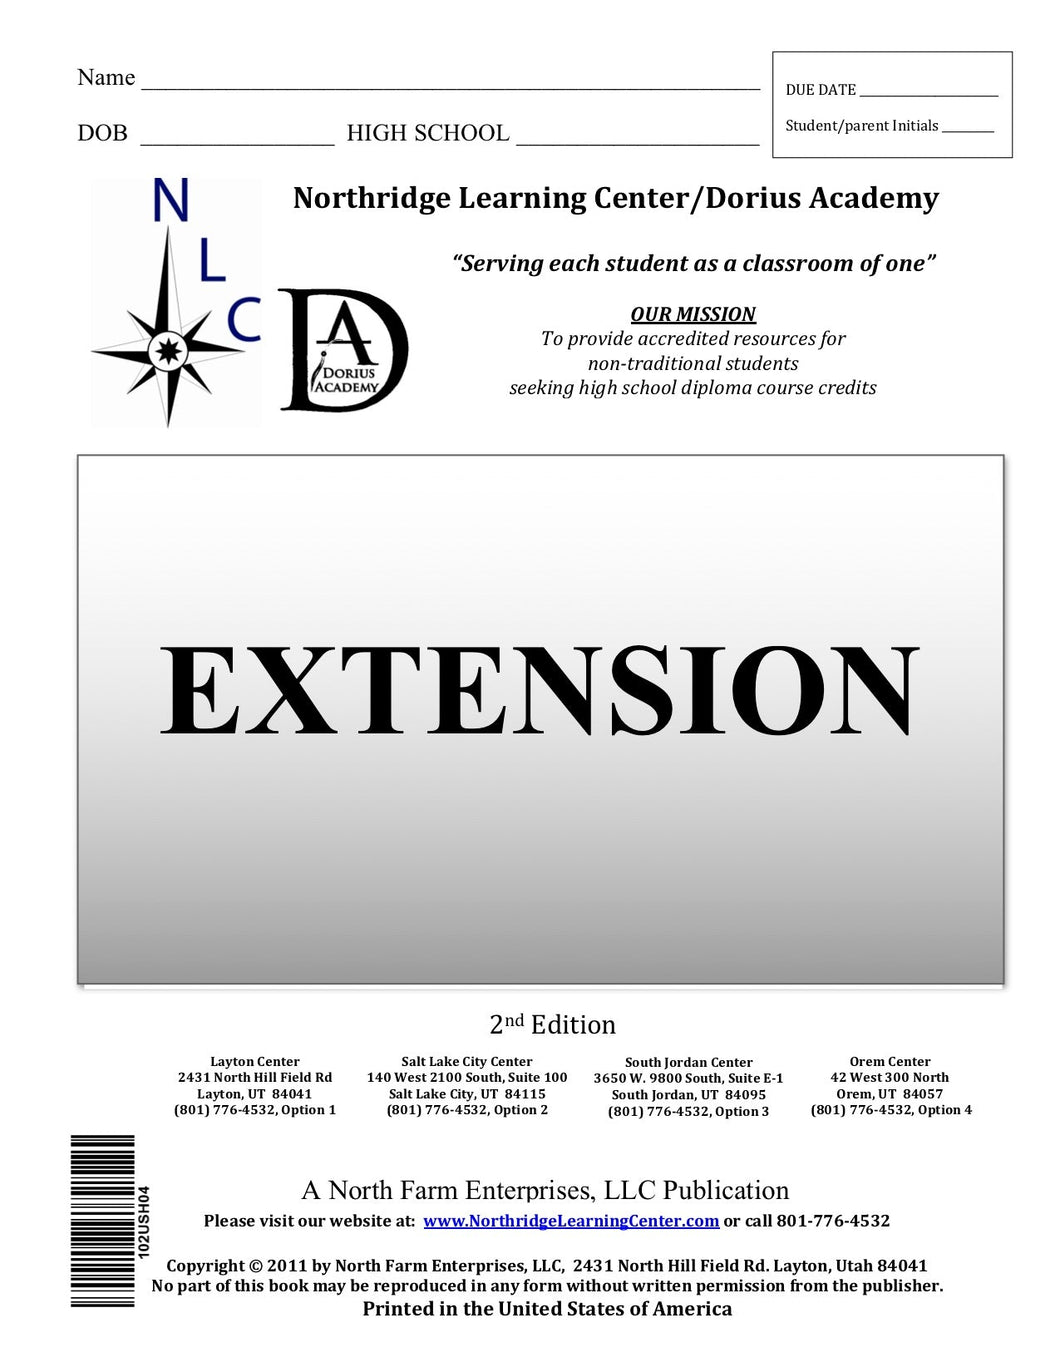 Language Arts 12, Section I - Extension